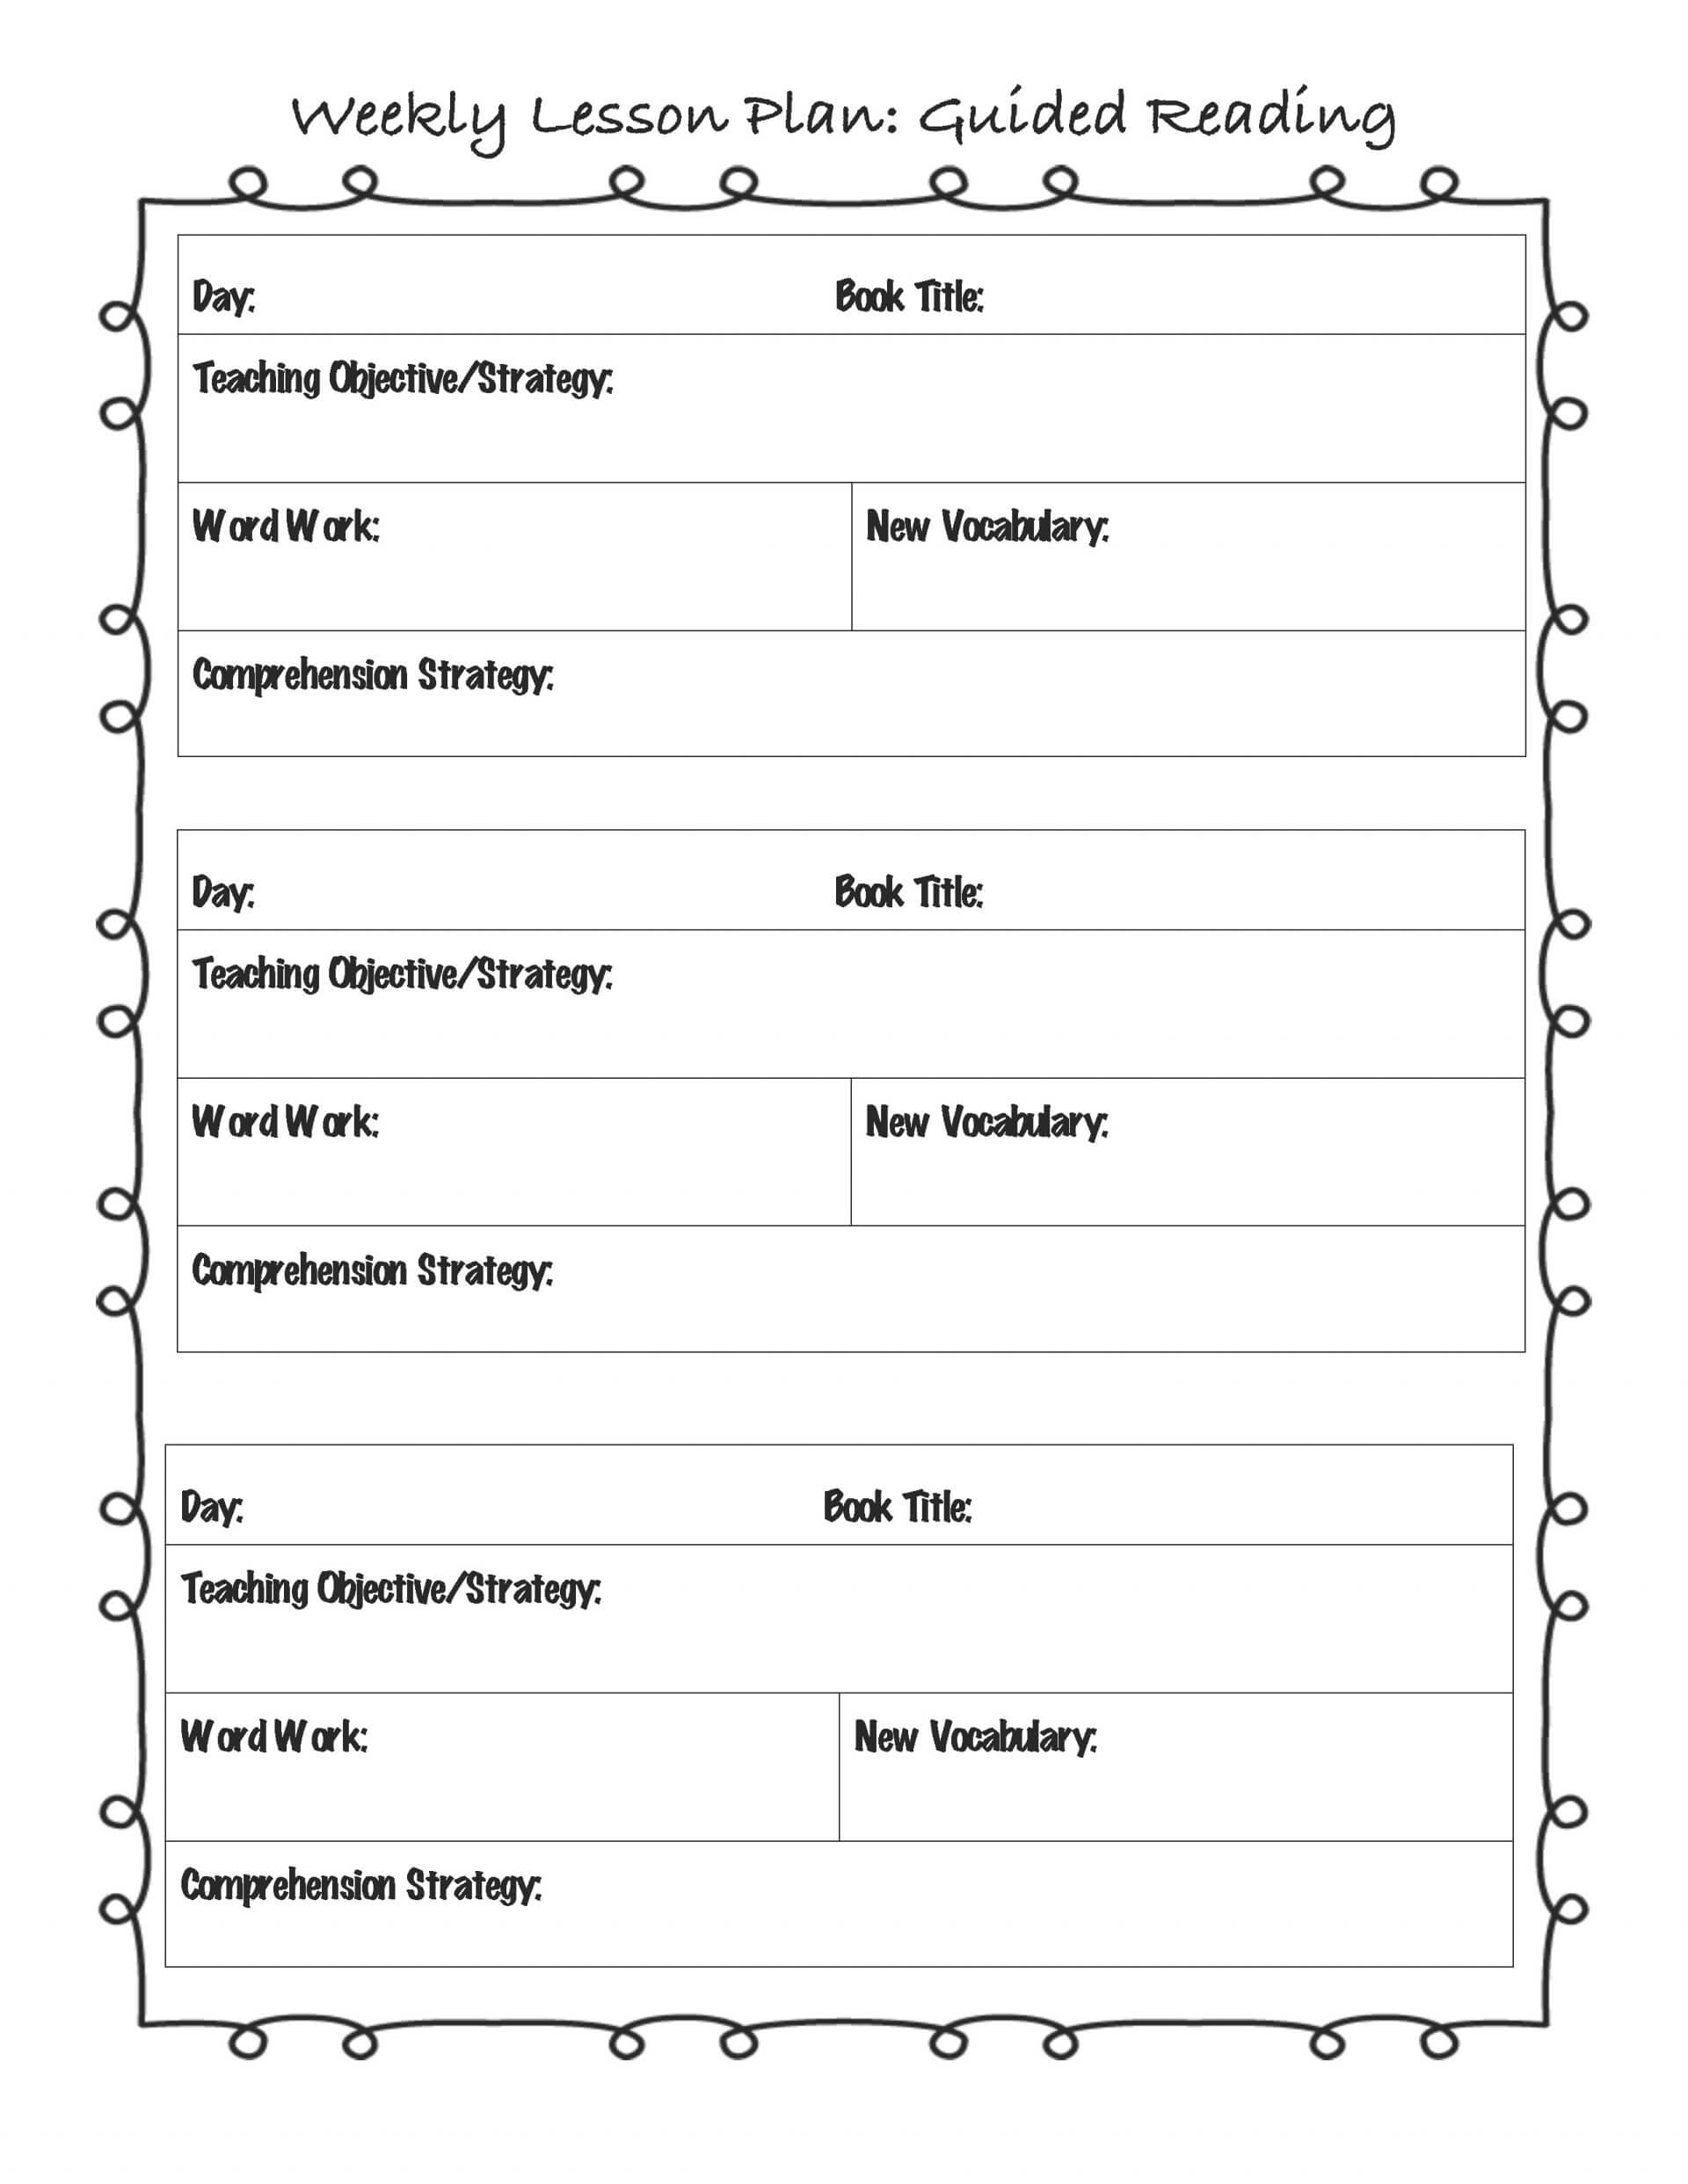 029 Template Ideas Preschool Daily Report Weekly Awesome With Regard To Preschool Weekly Report Template